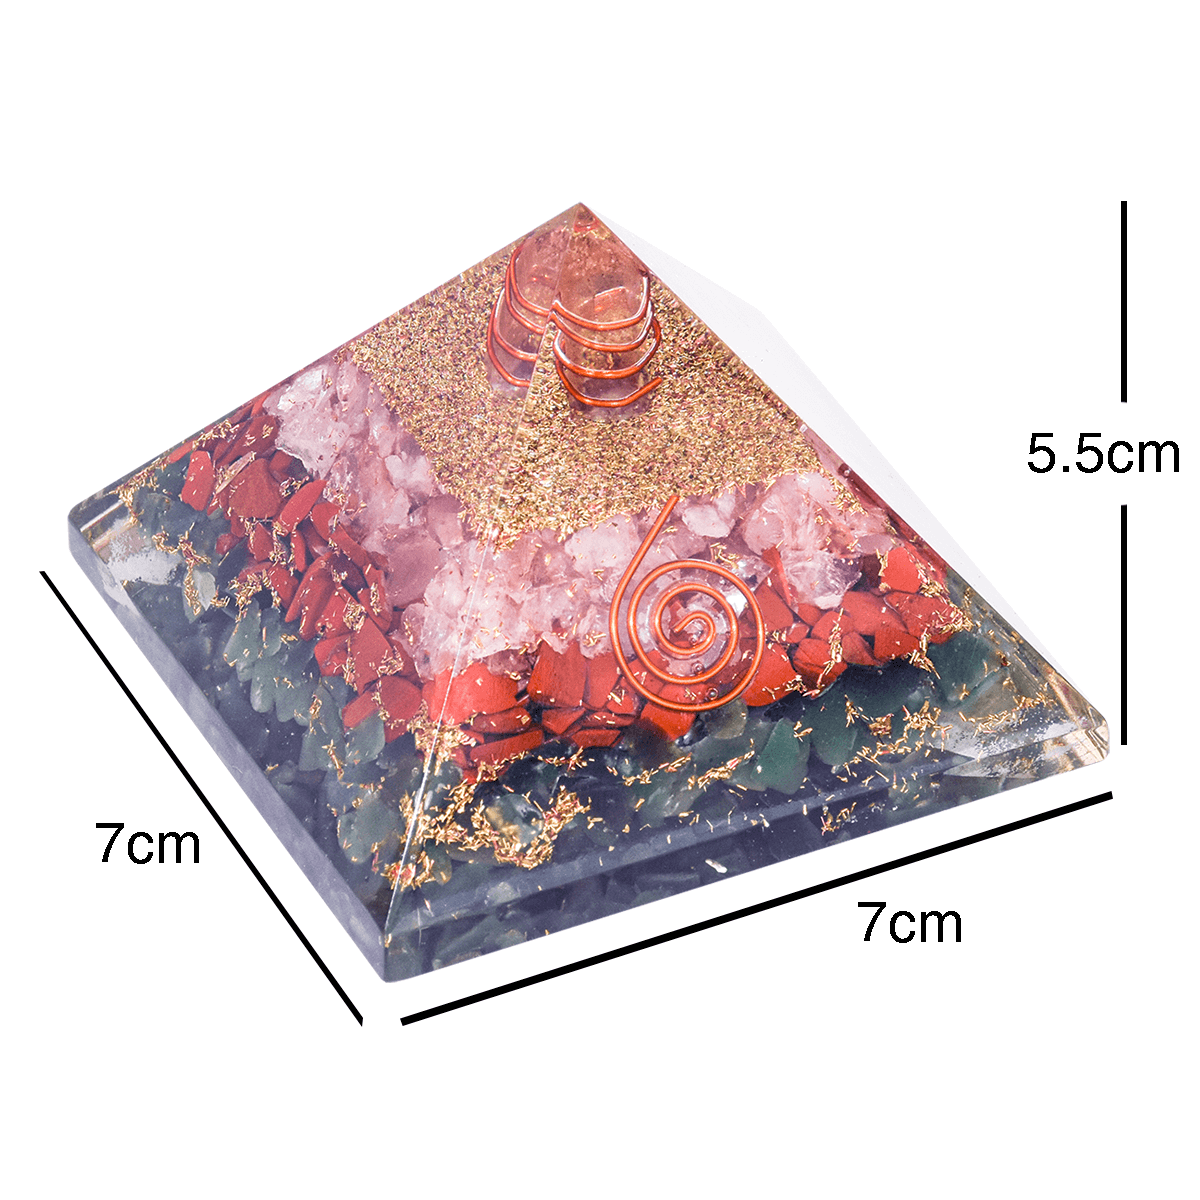 Pyramid made of Natural Crystal for Stability, Healthy &amp; Growth in Love, Marriage Relationship &amp; Other Relations Family, Personal &amp; All Other Relations. Feng Shui remedy Decorative Showpiece - 8 cm  (Crystal, Multicolor)